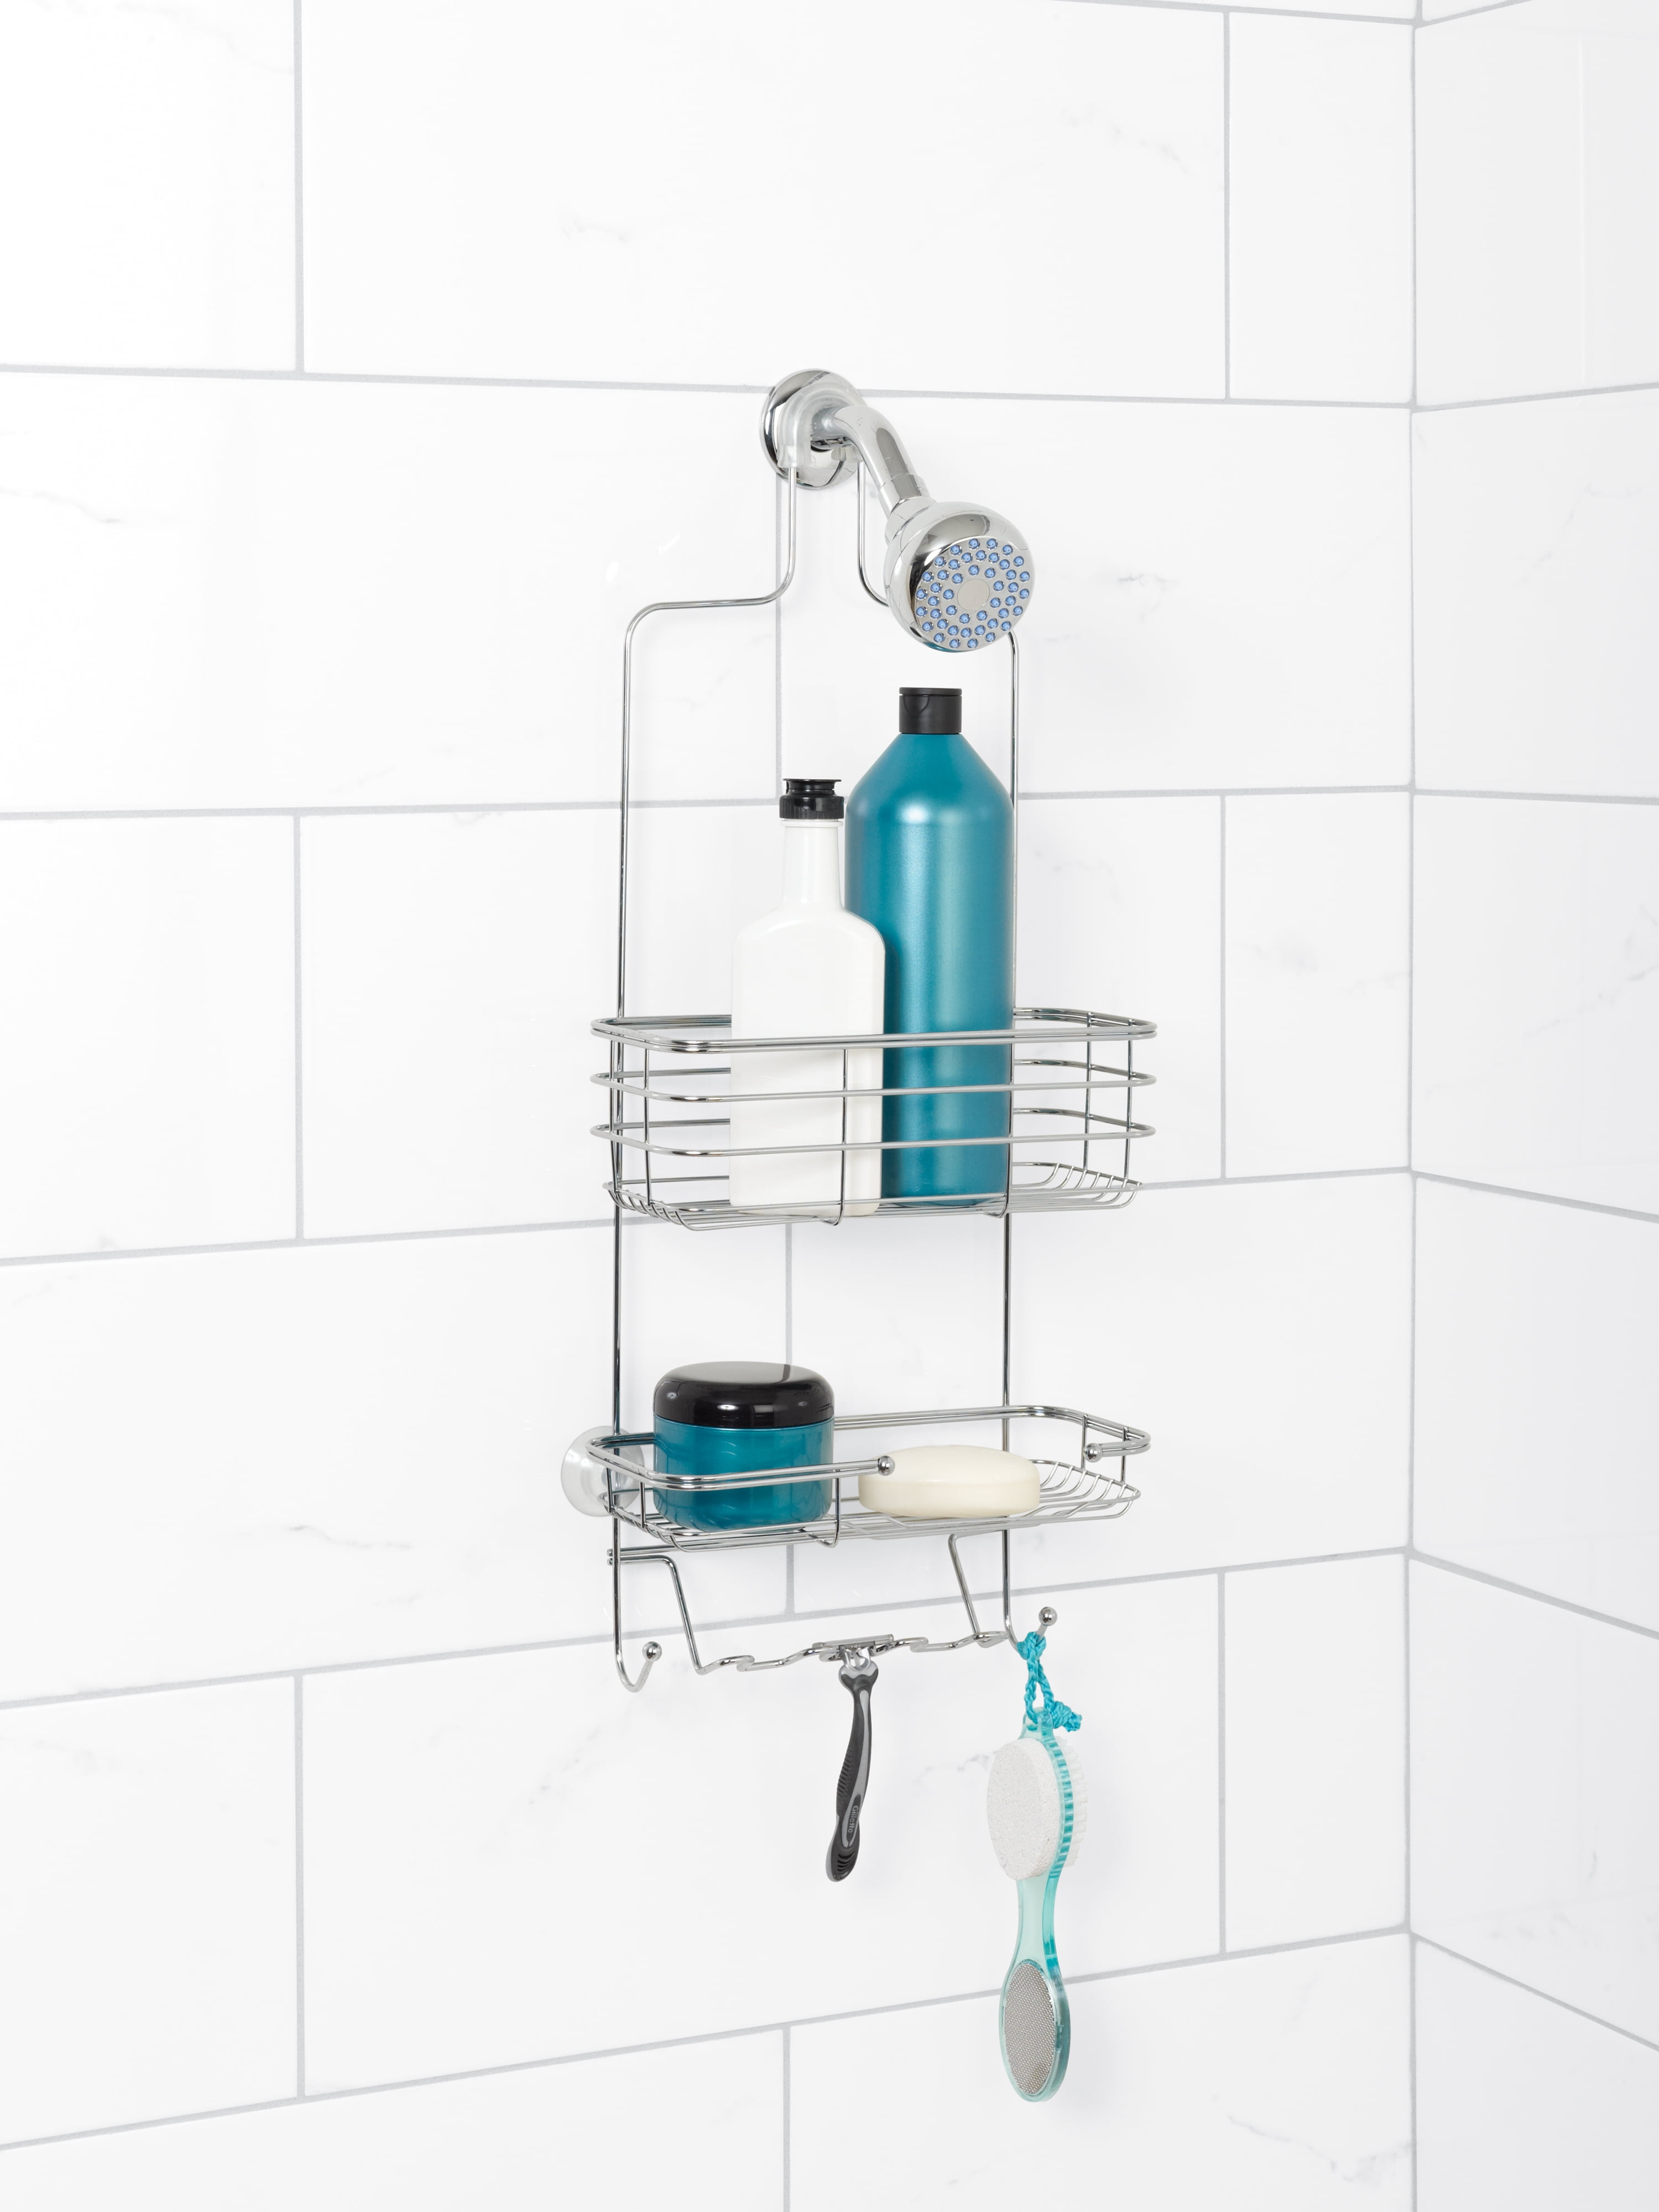 Smart Design | Pop Up Shower Caddy with 7 Compartments and Strap Handles - VentilAir Mesh Material Organization - 9 x 12 inch - White